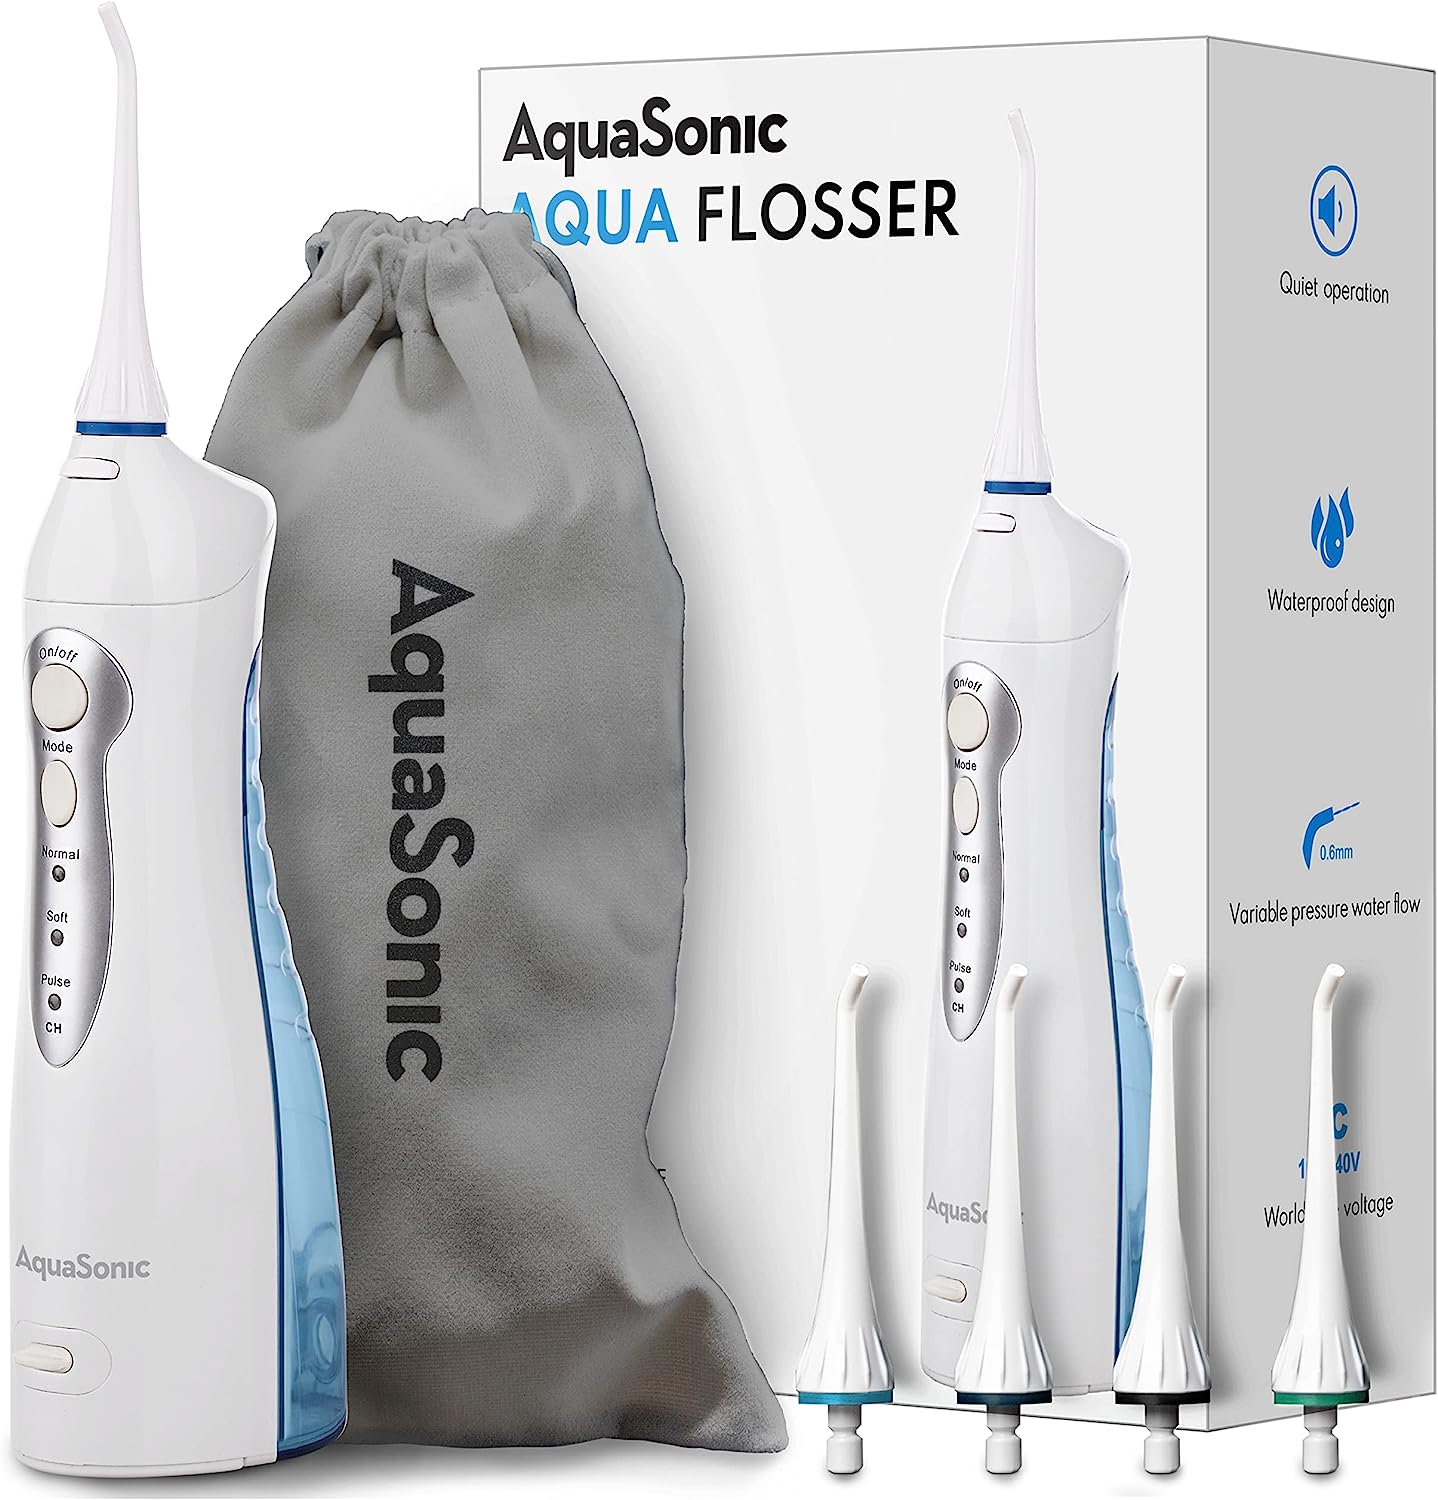 Aquasonic Water Flosser Cordless Rechargeable Oral Irrigator for Kids and Adults, White - image 1 of 6